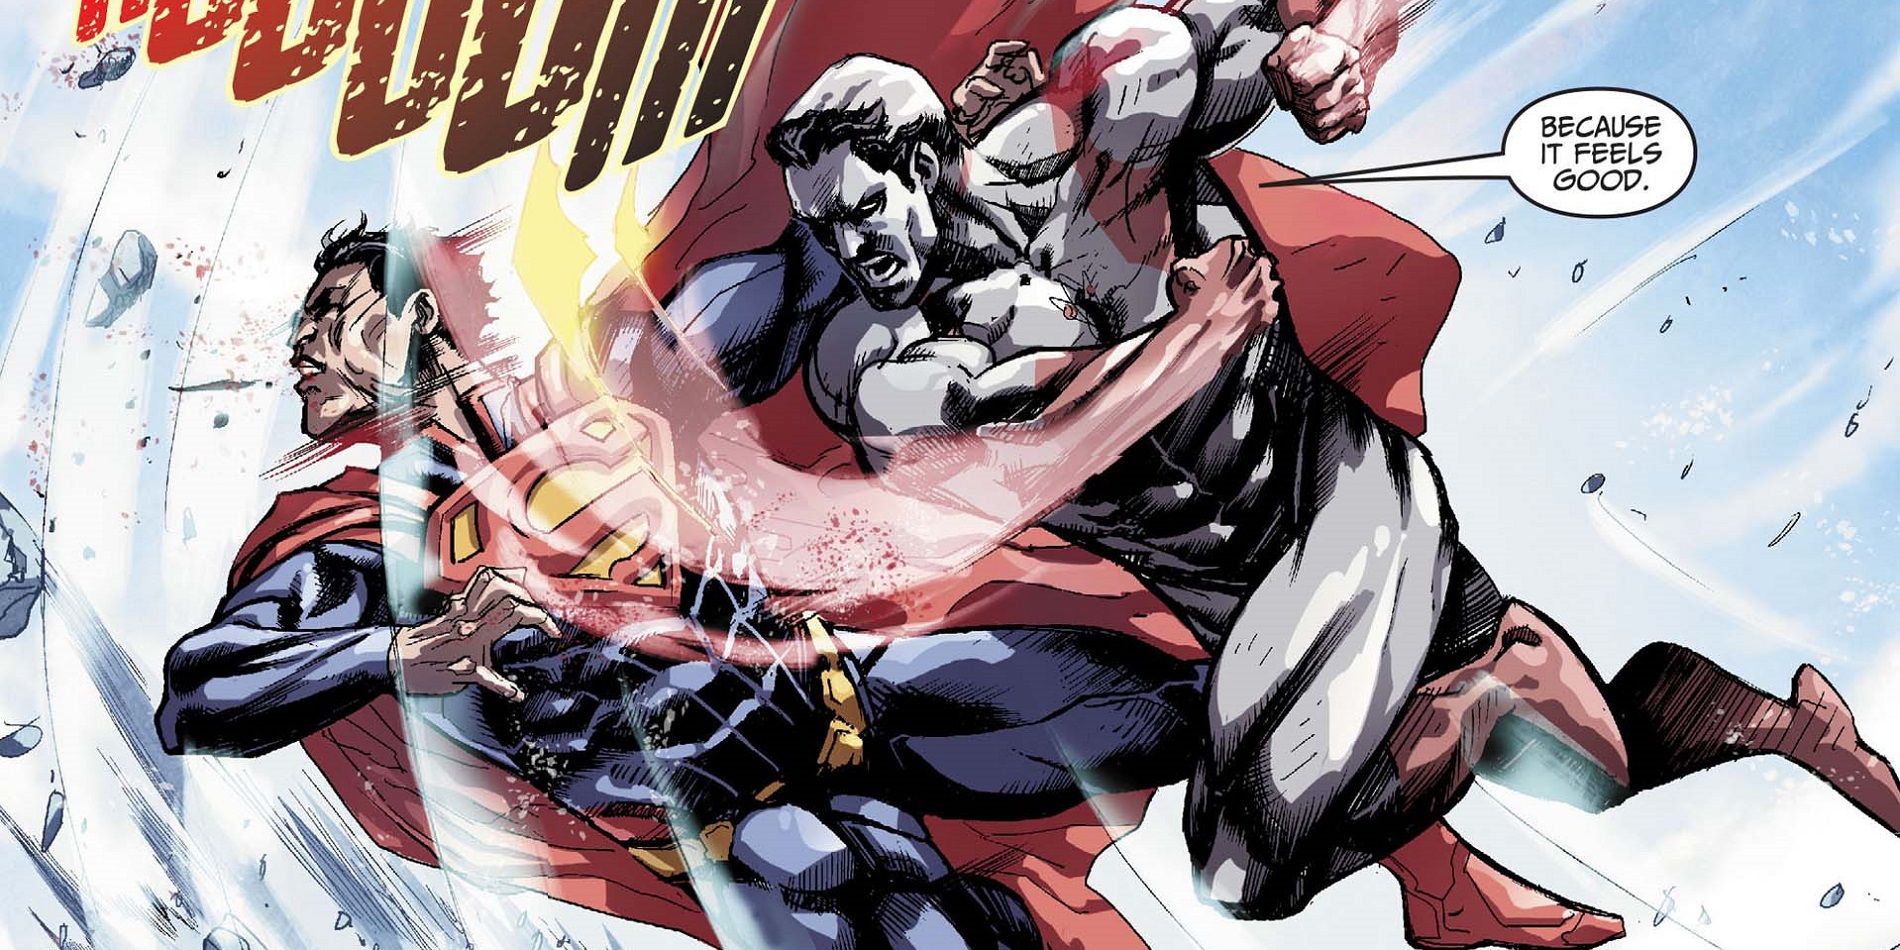 Captain Atom fights Superman during Injustice